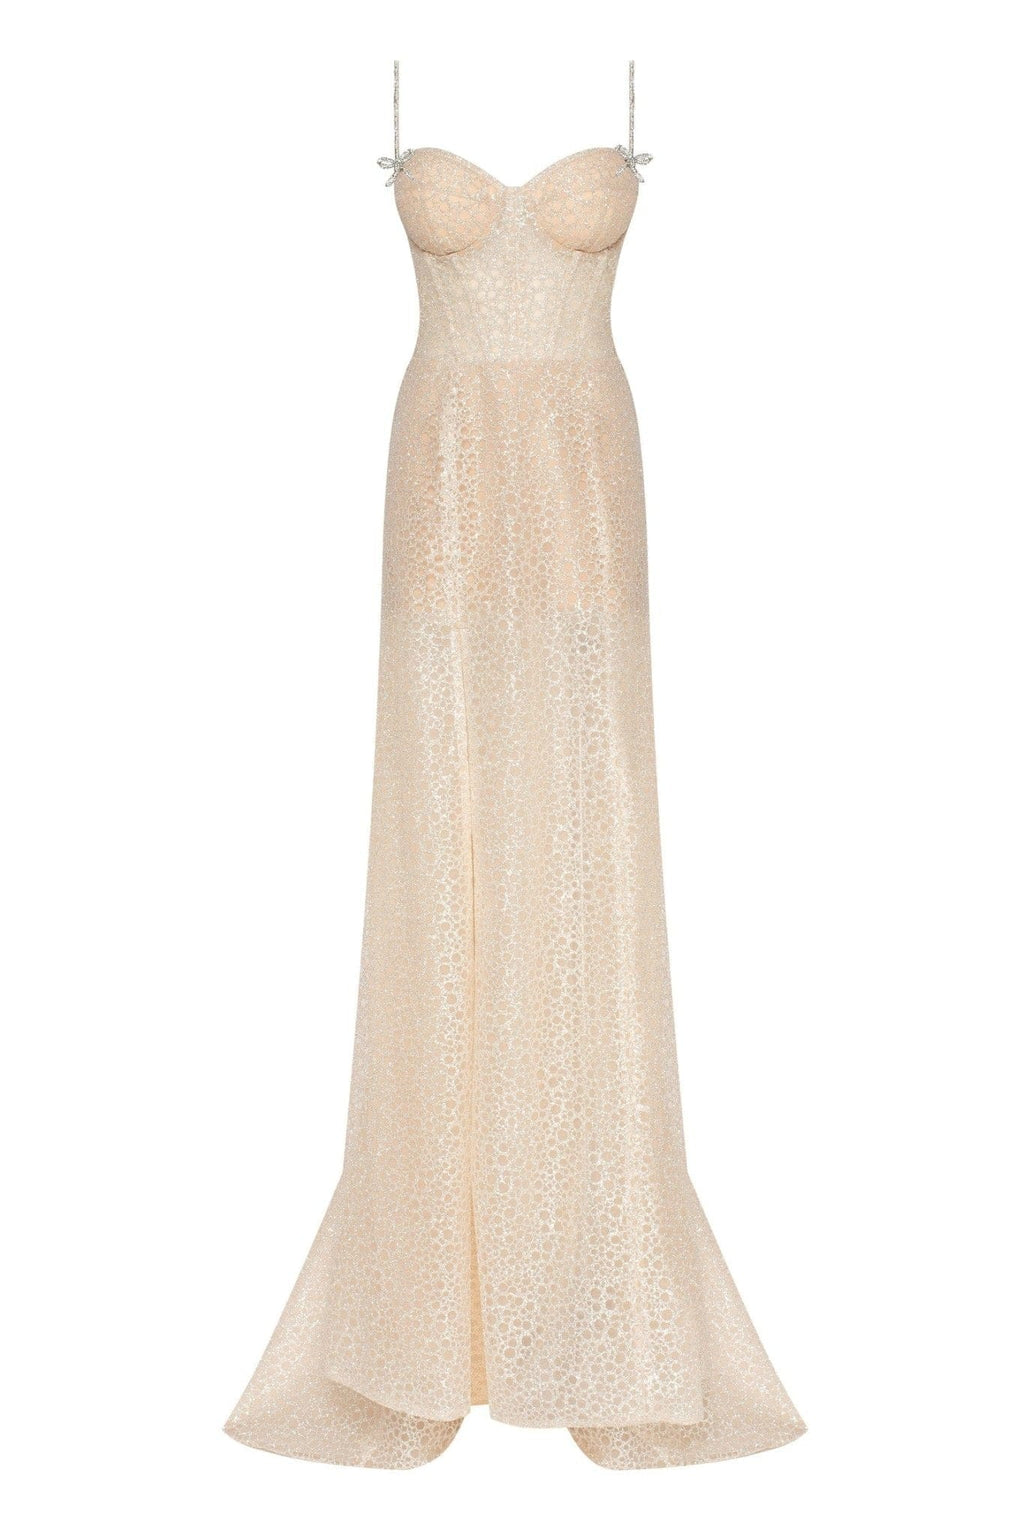 Magic Hour Maxi Dress - Thigh Split Tie Back Dress in Gold Sequin